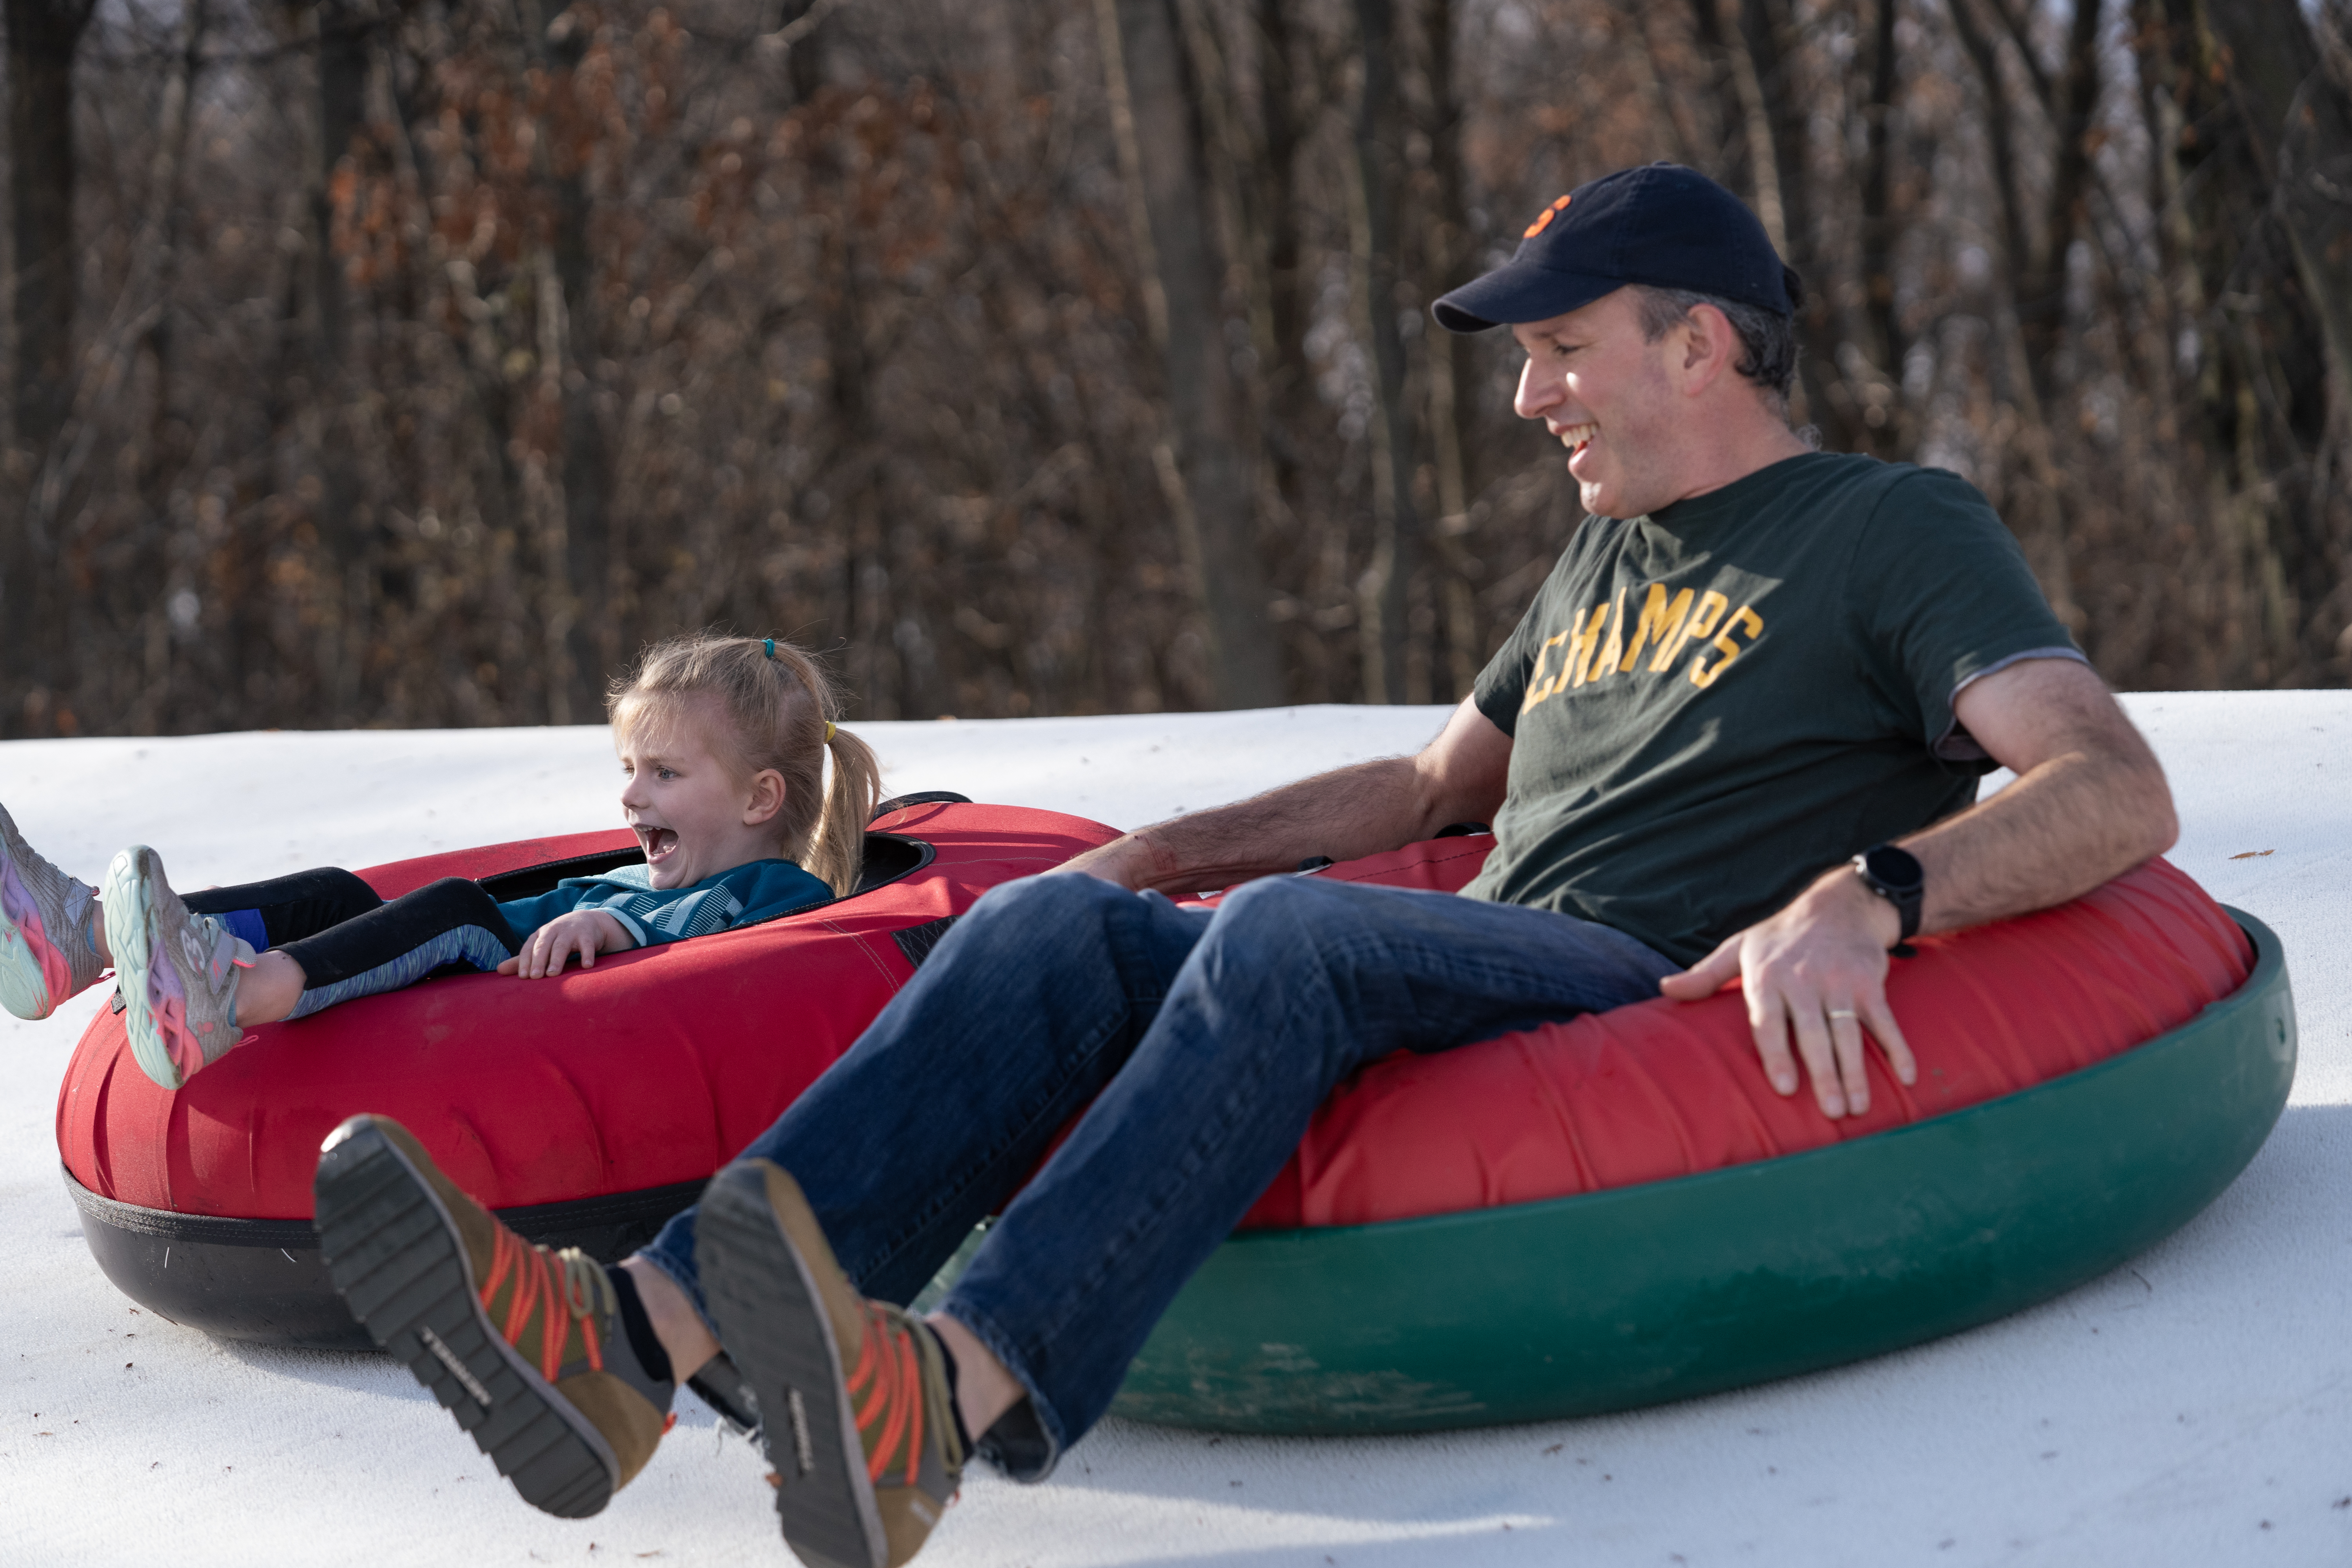 Parent and child on inner tubes sliding down a tubing hill.